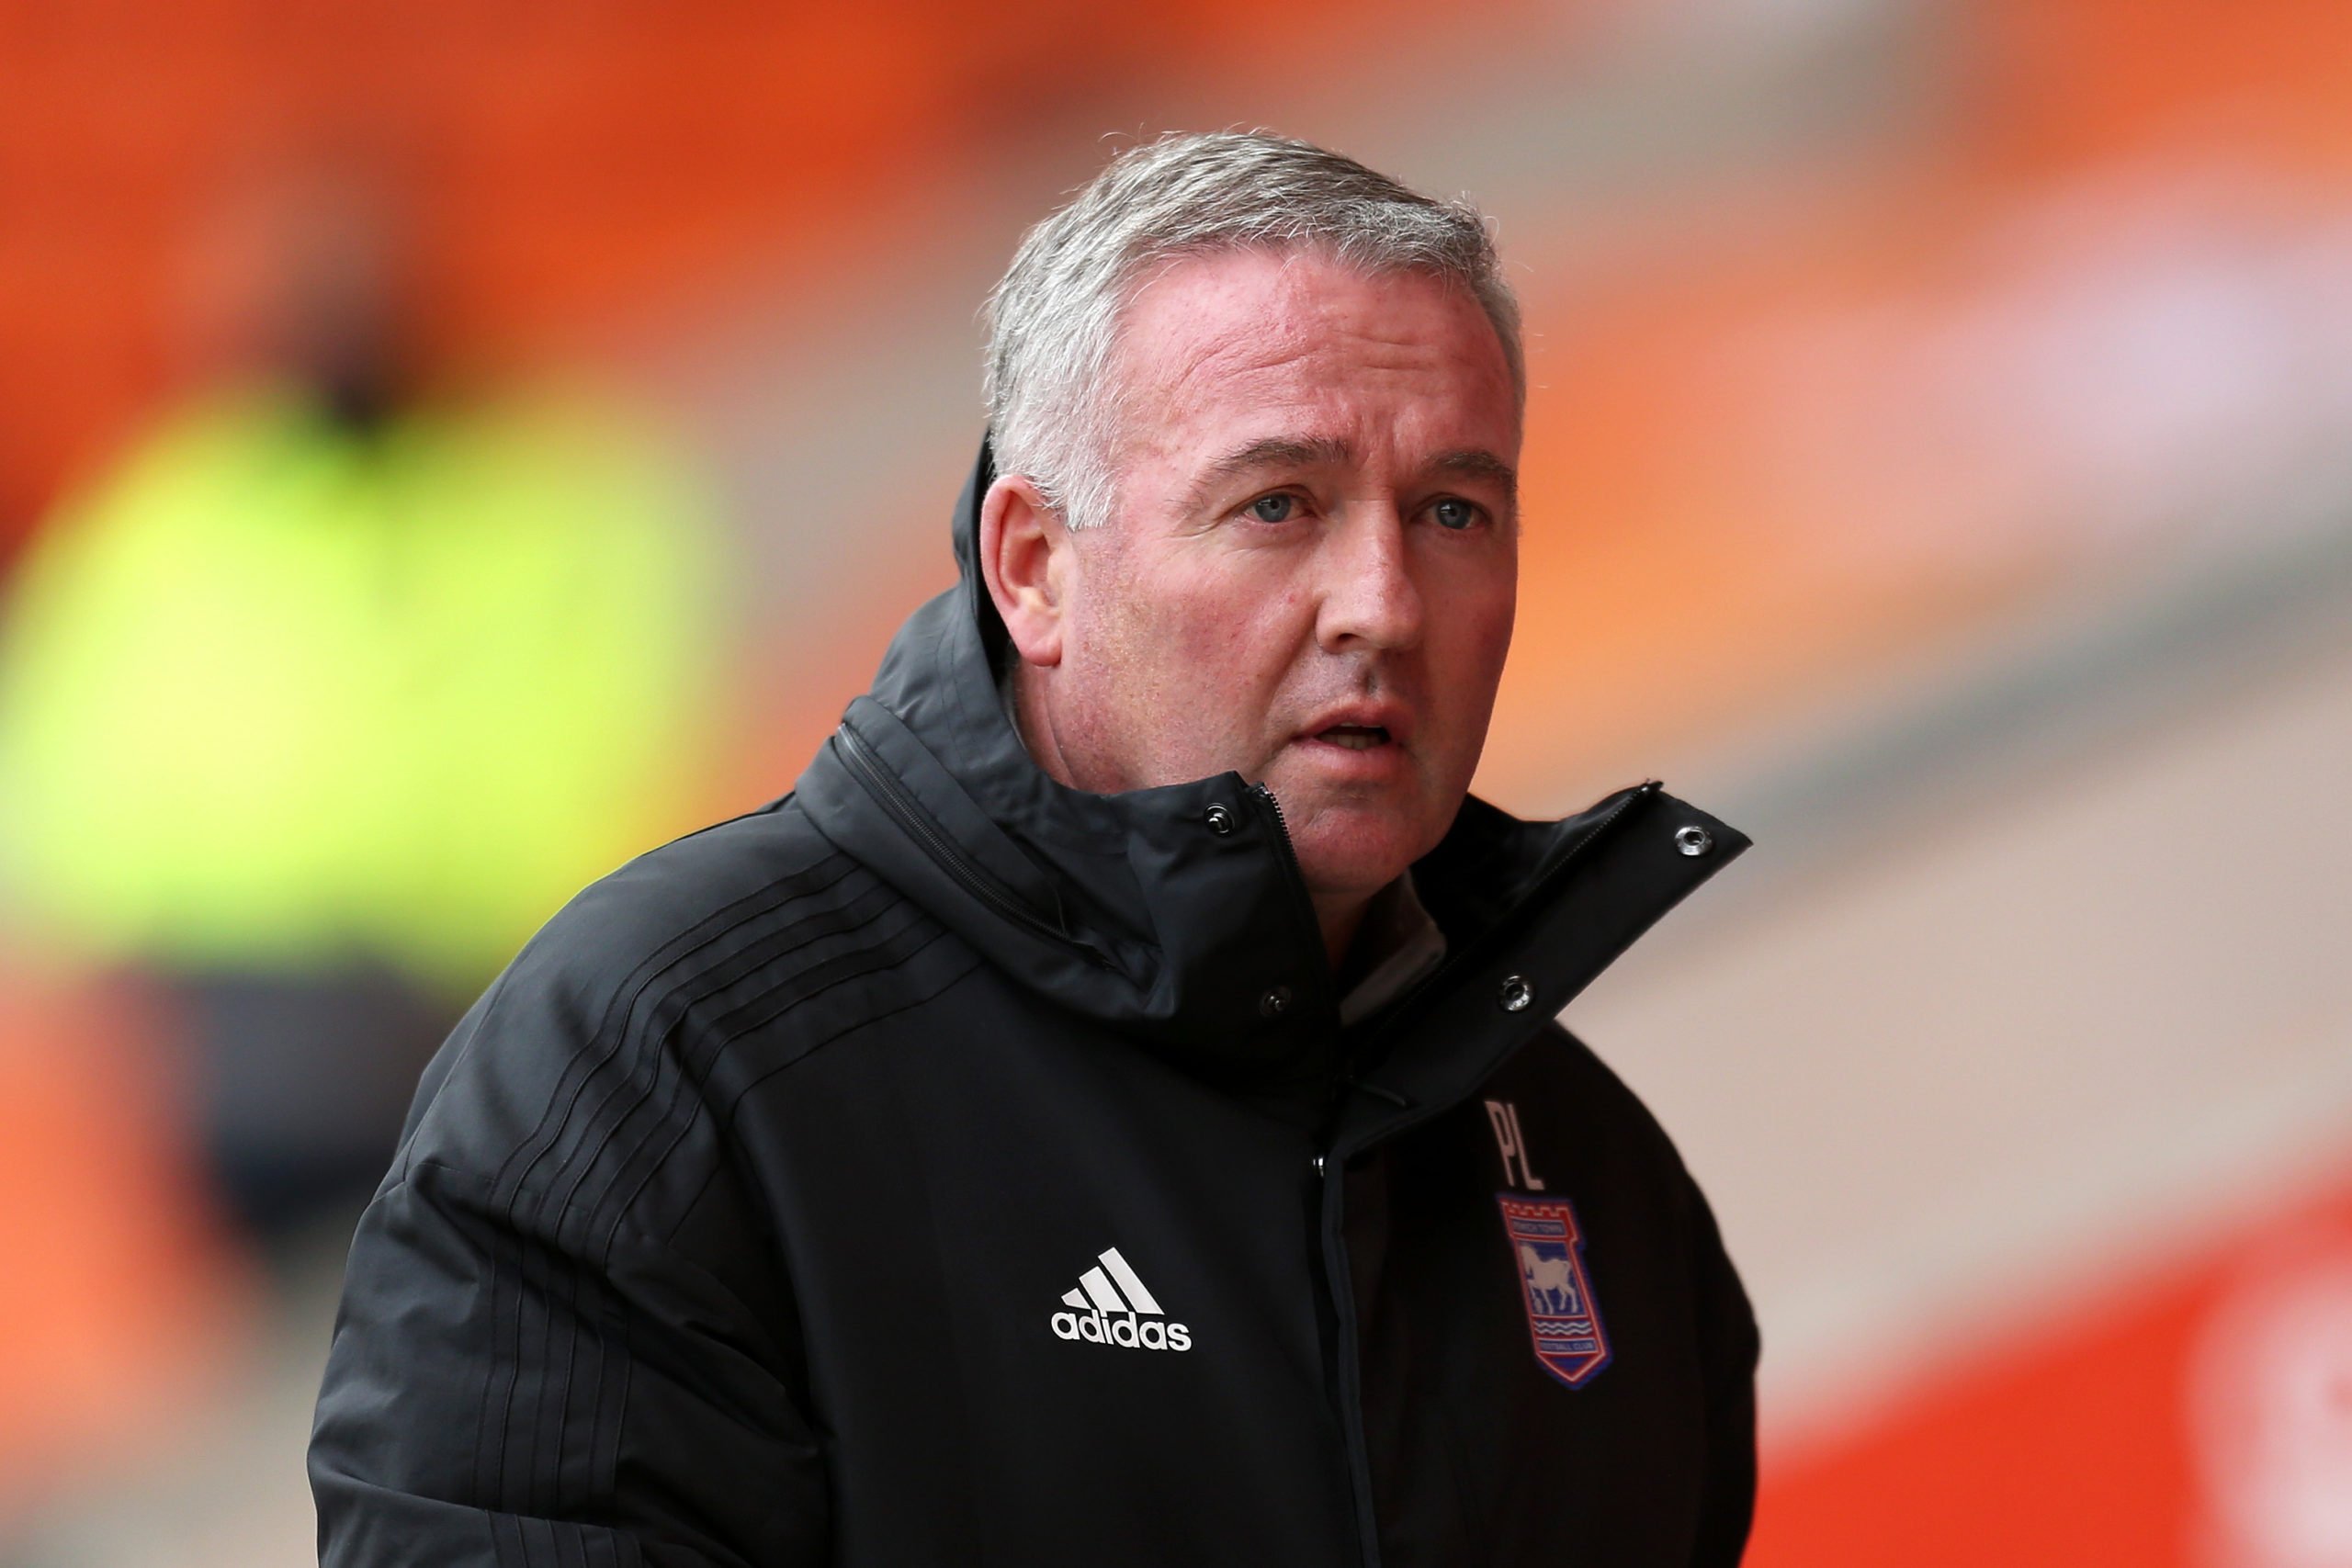 Radio show asks Paul Lambert about the Celtic job after leaving Ipswich